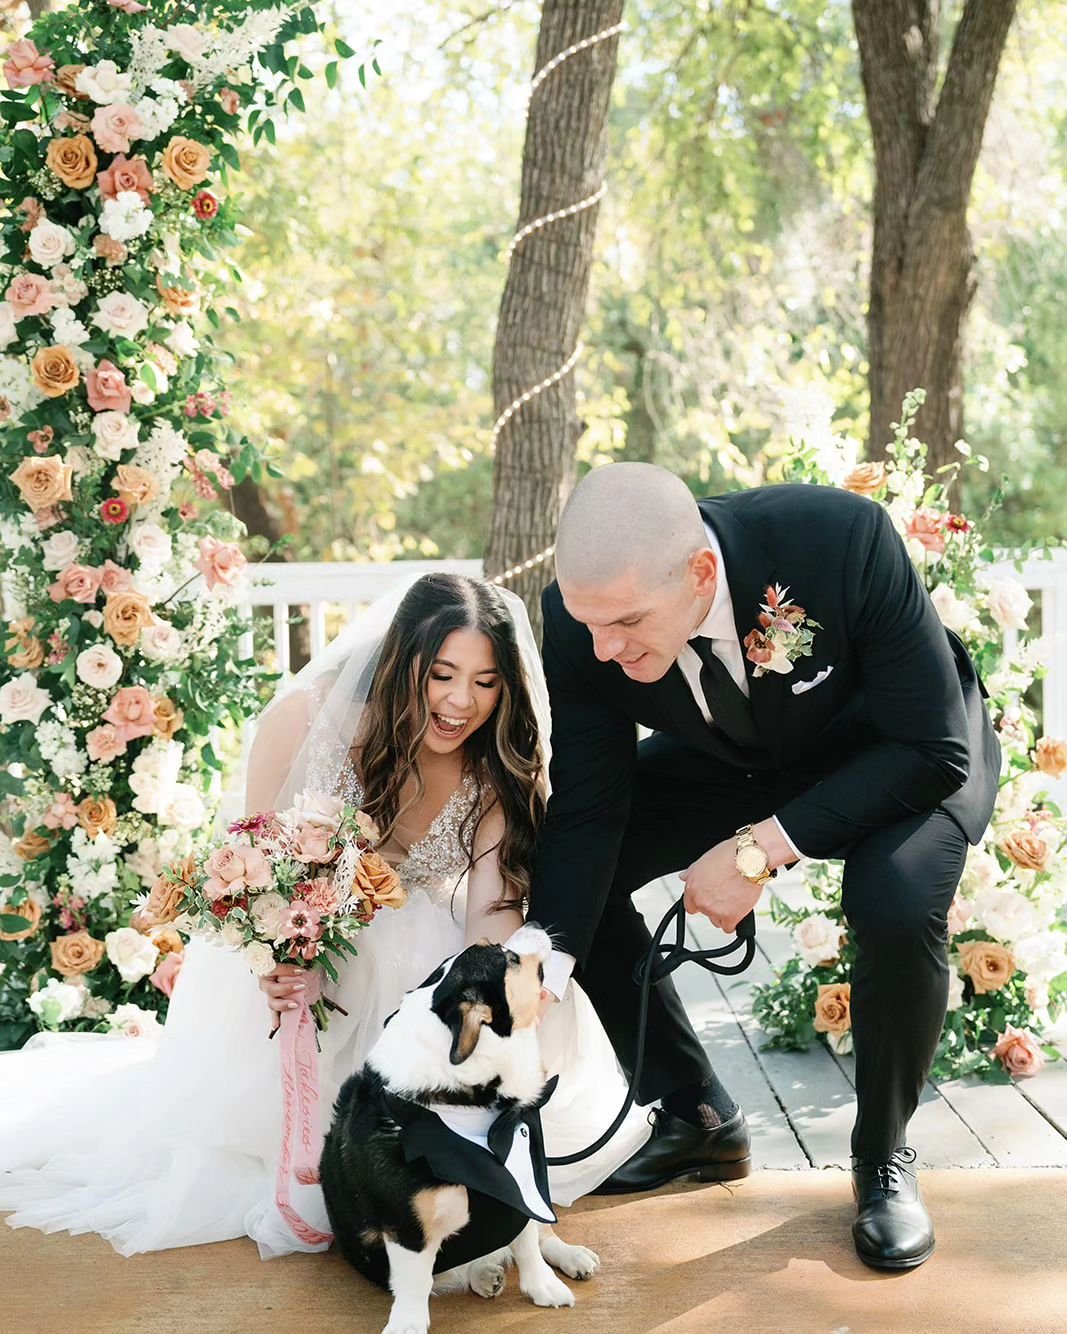 When every member of the family is included in your wedding! 🐕💕💍 We love it when our couples say &quot;I do&quot; with their furry best friends by their side.

Need blooms for your four-legged friend? We're here for it! 

📷 @moniqueannephotograph